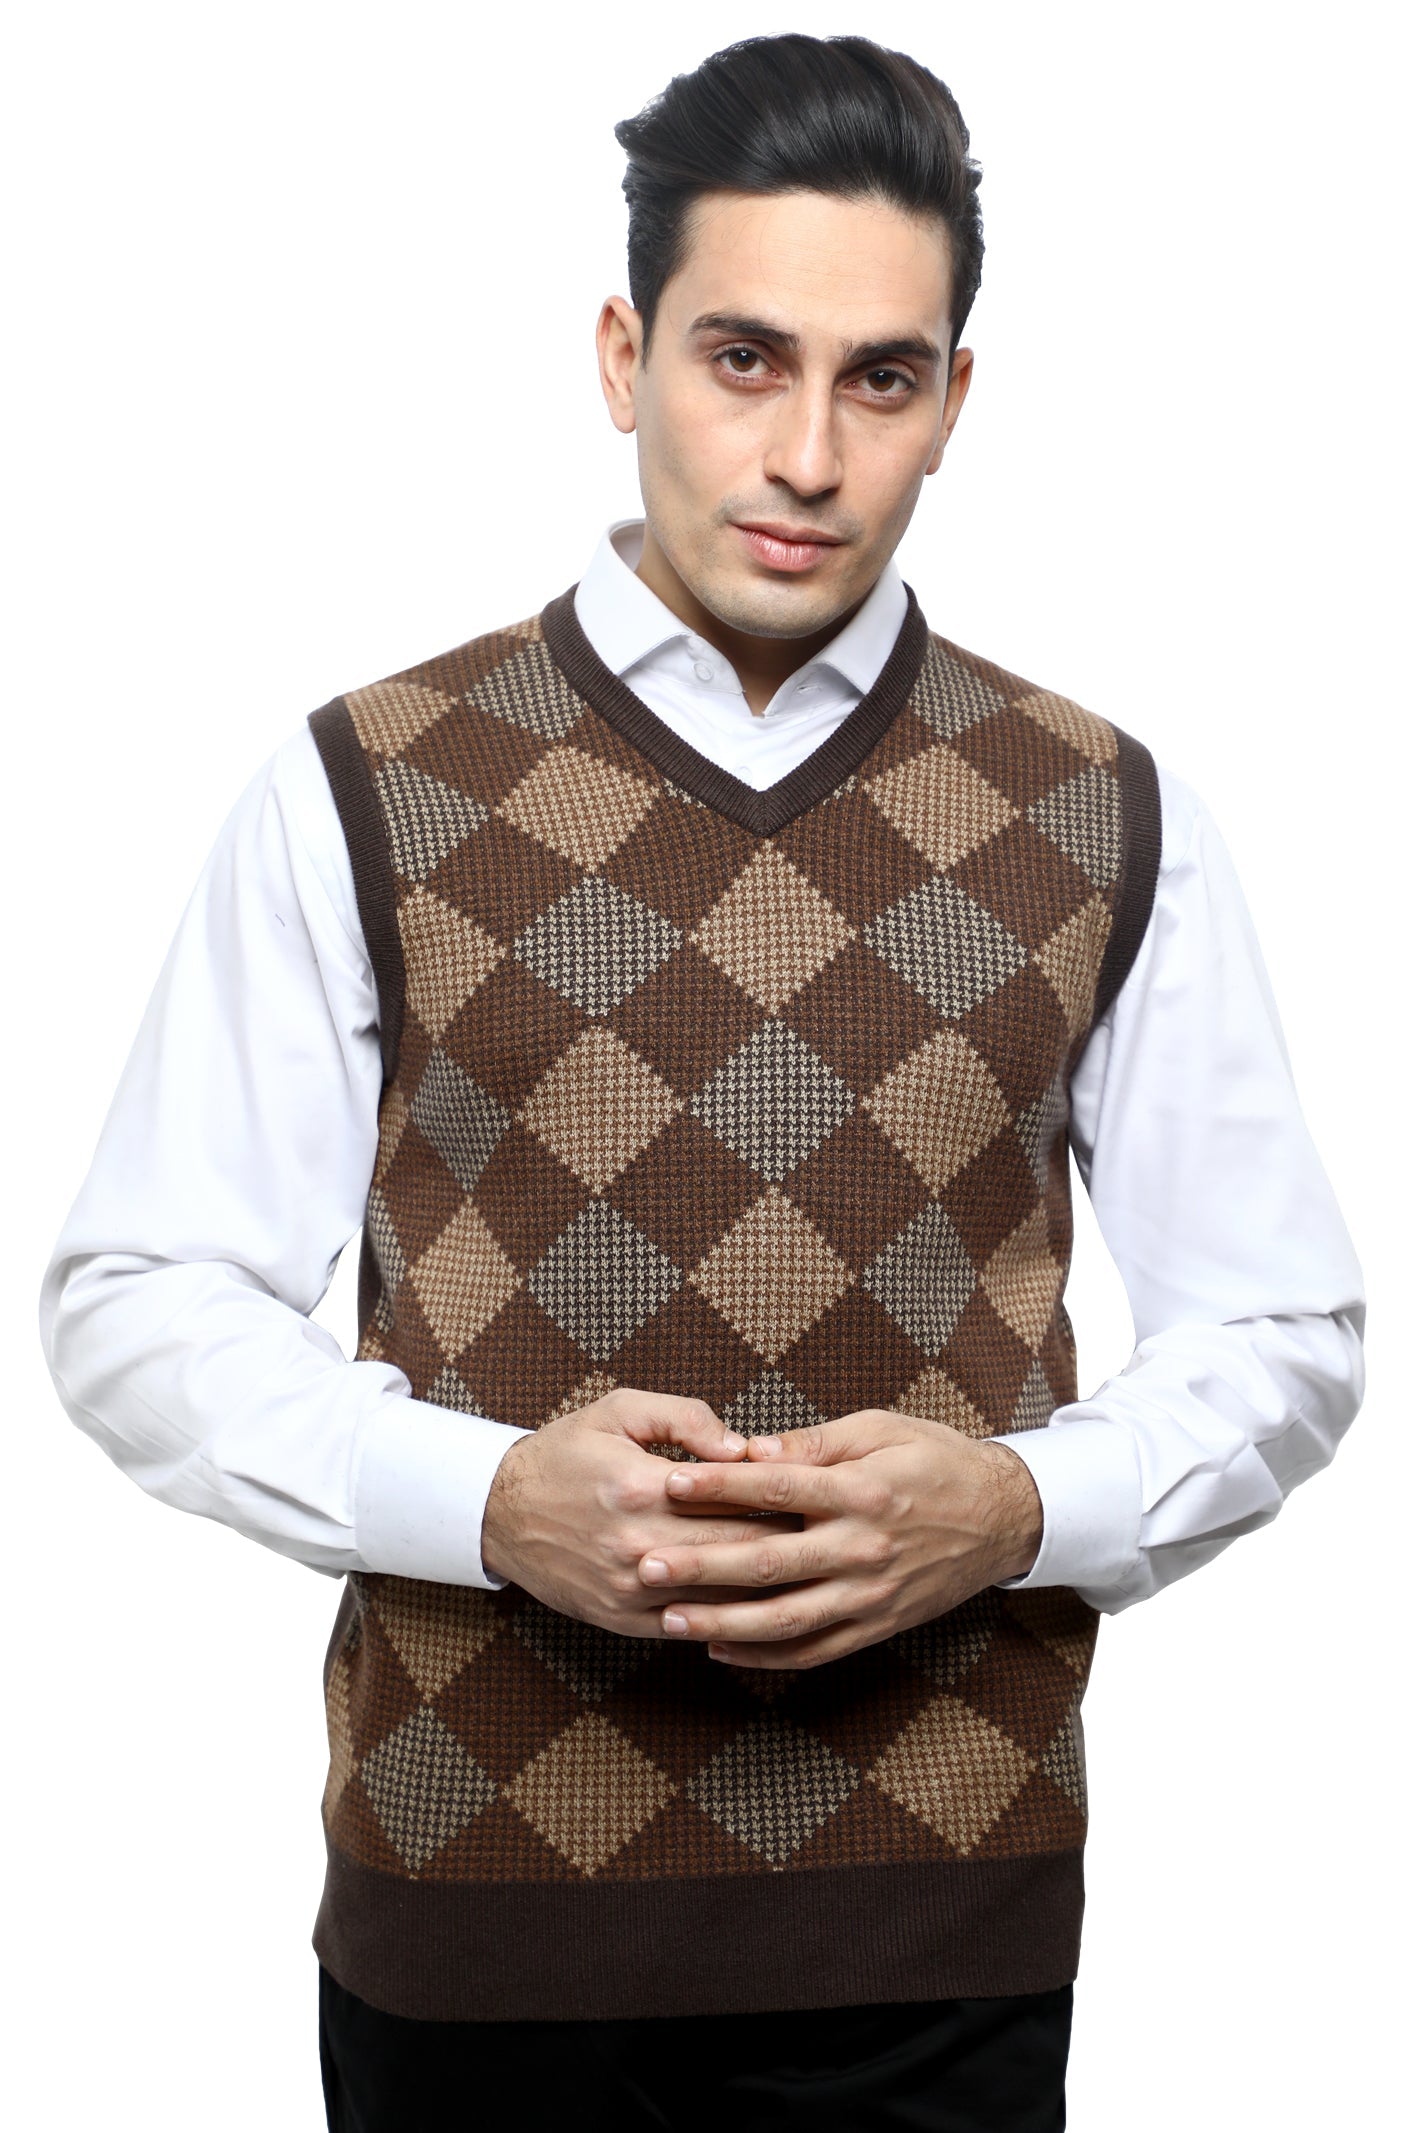 Gents Sweater (Sleeveless) In Brown SKU: SA563-BROWN - Diners